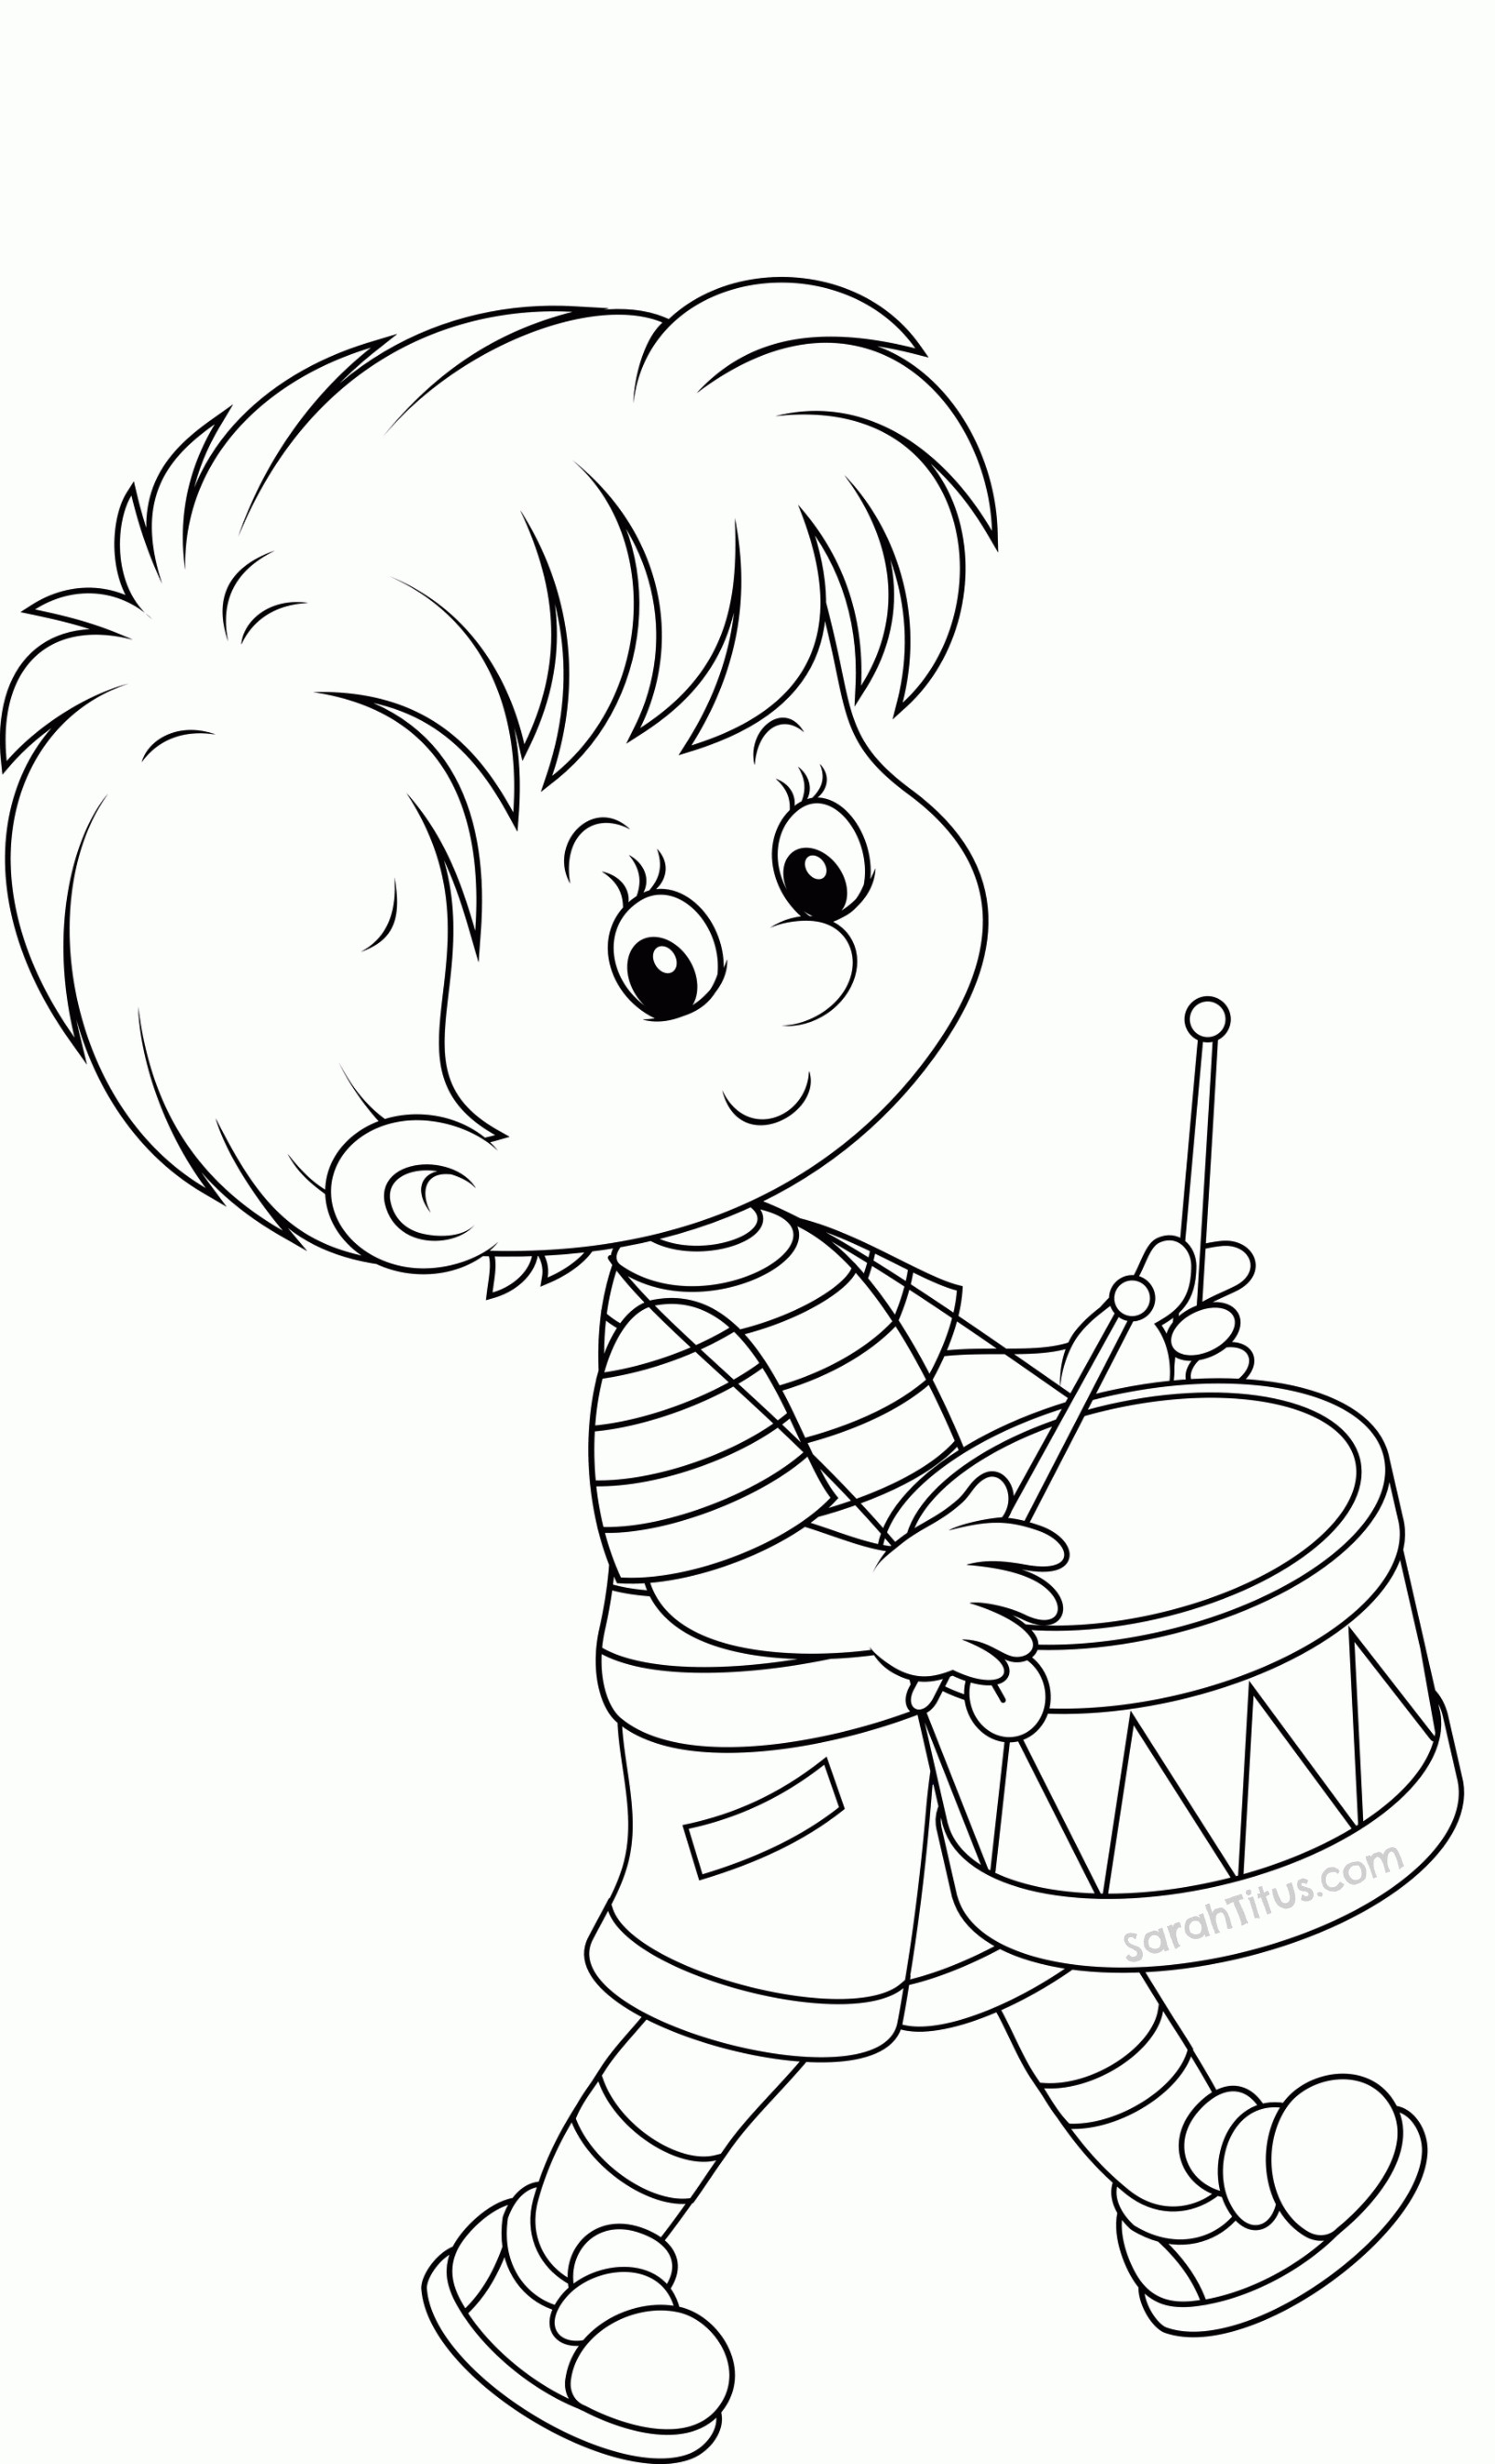 Coloring Sheets For Little Boys
 A Coloring Page A Little Boy Coloring Home